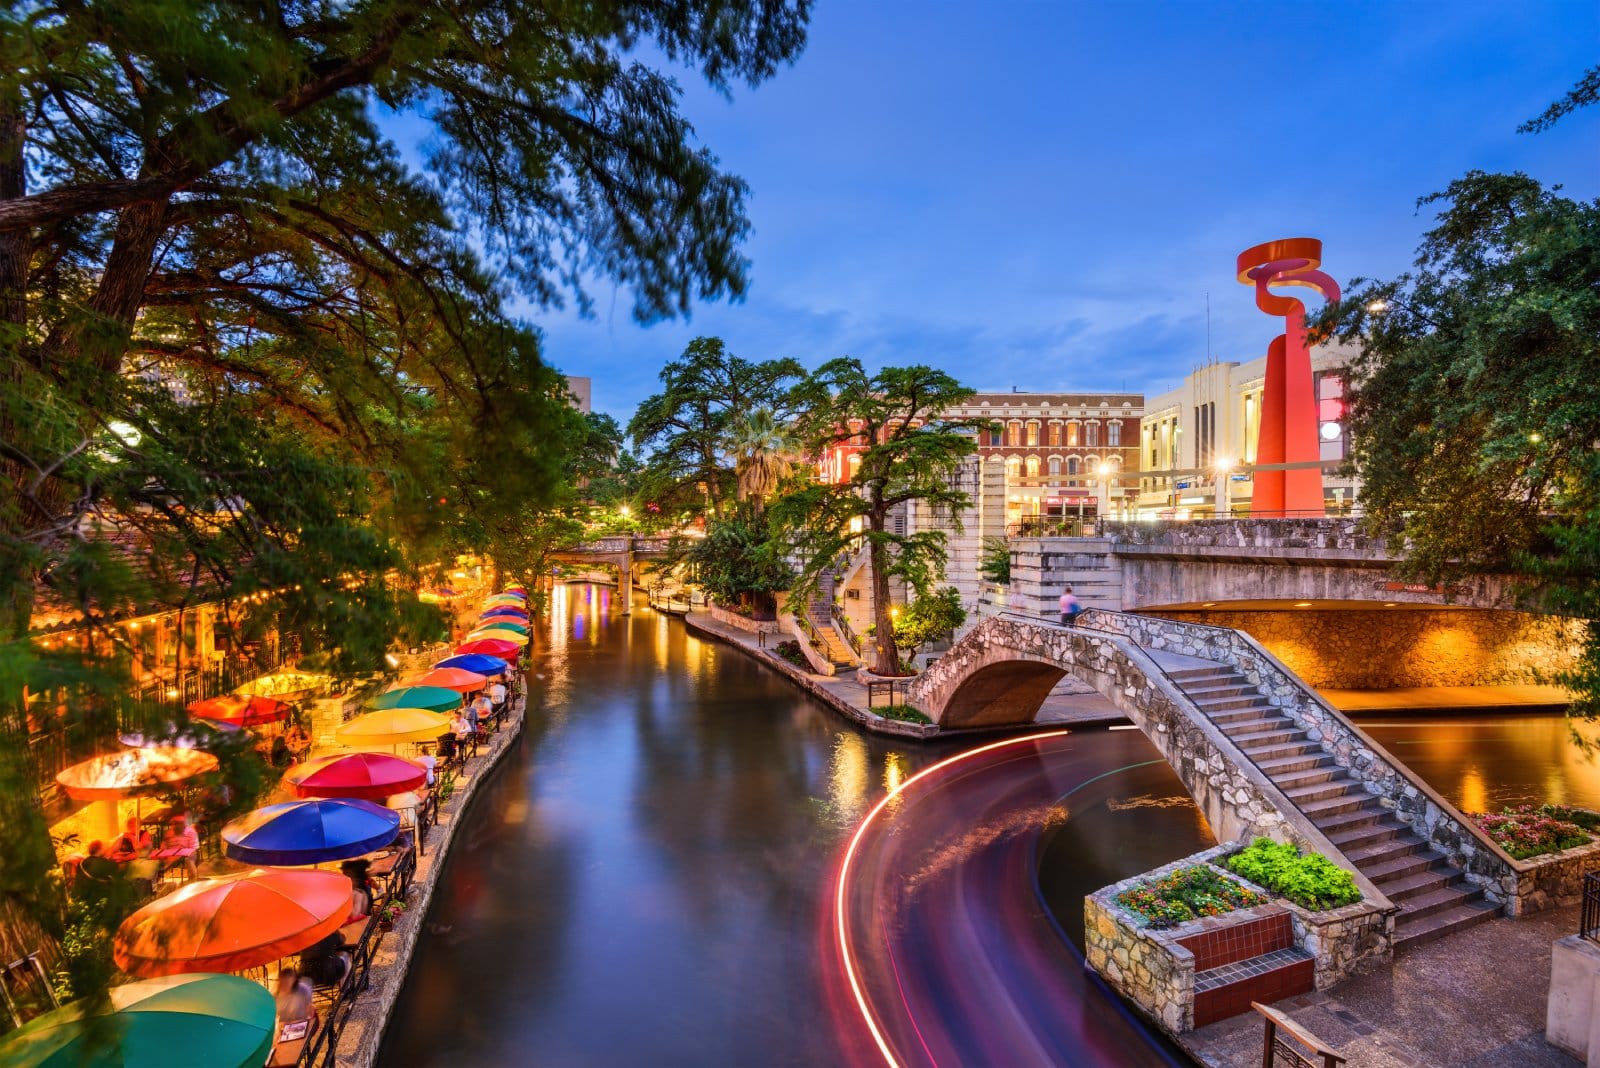 <p><span>This network of walkways along the San Antonio River is lined with bars, shops, restaurants, and nature. It’s free to explore, and boat rides are available for around $10, offering a unique city perspective.</span></p>